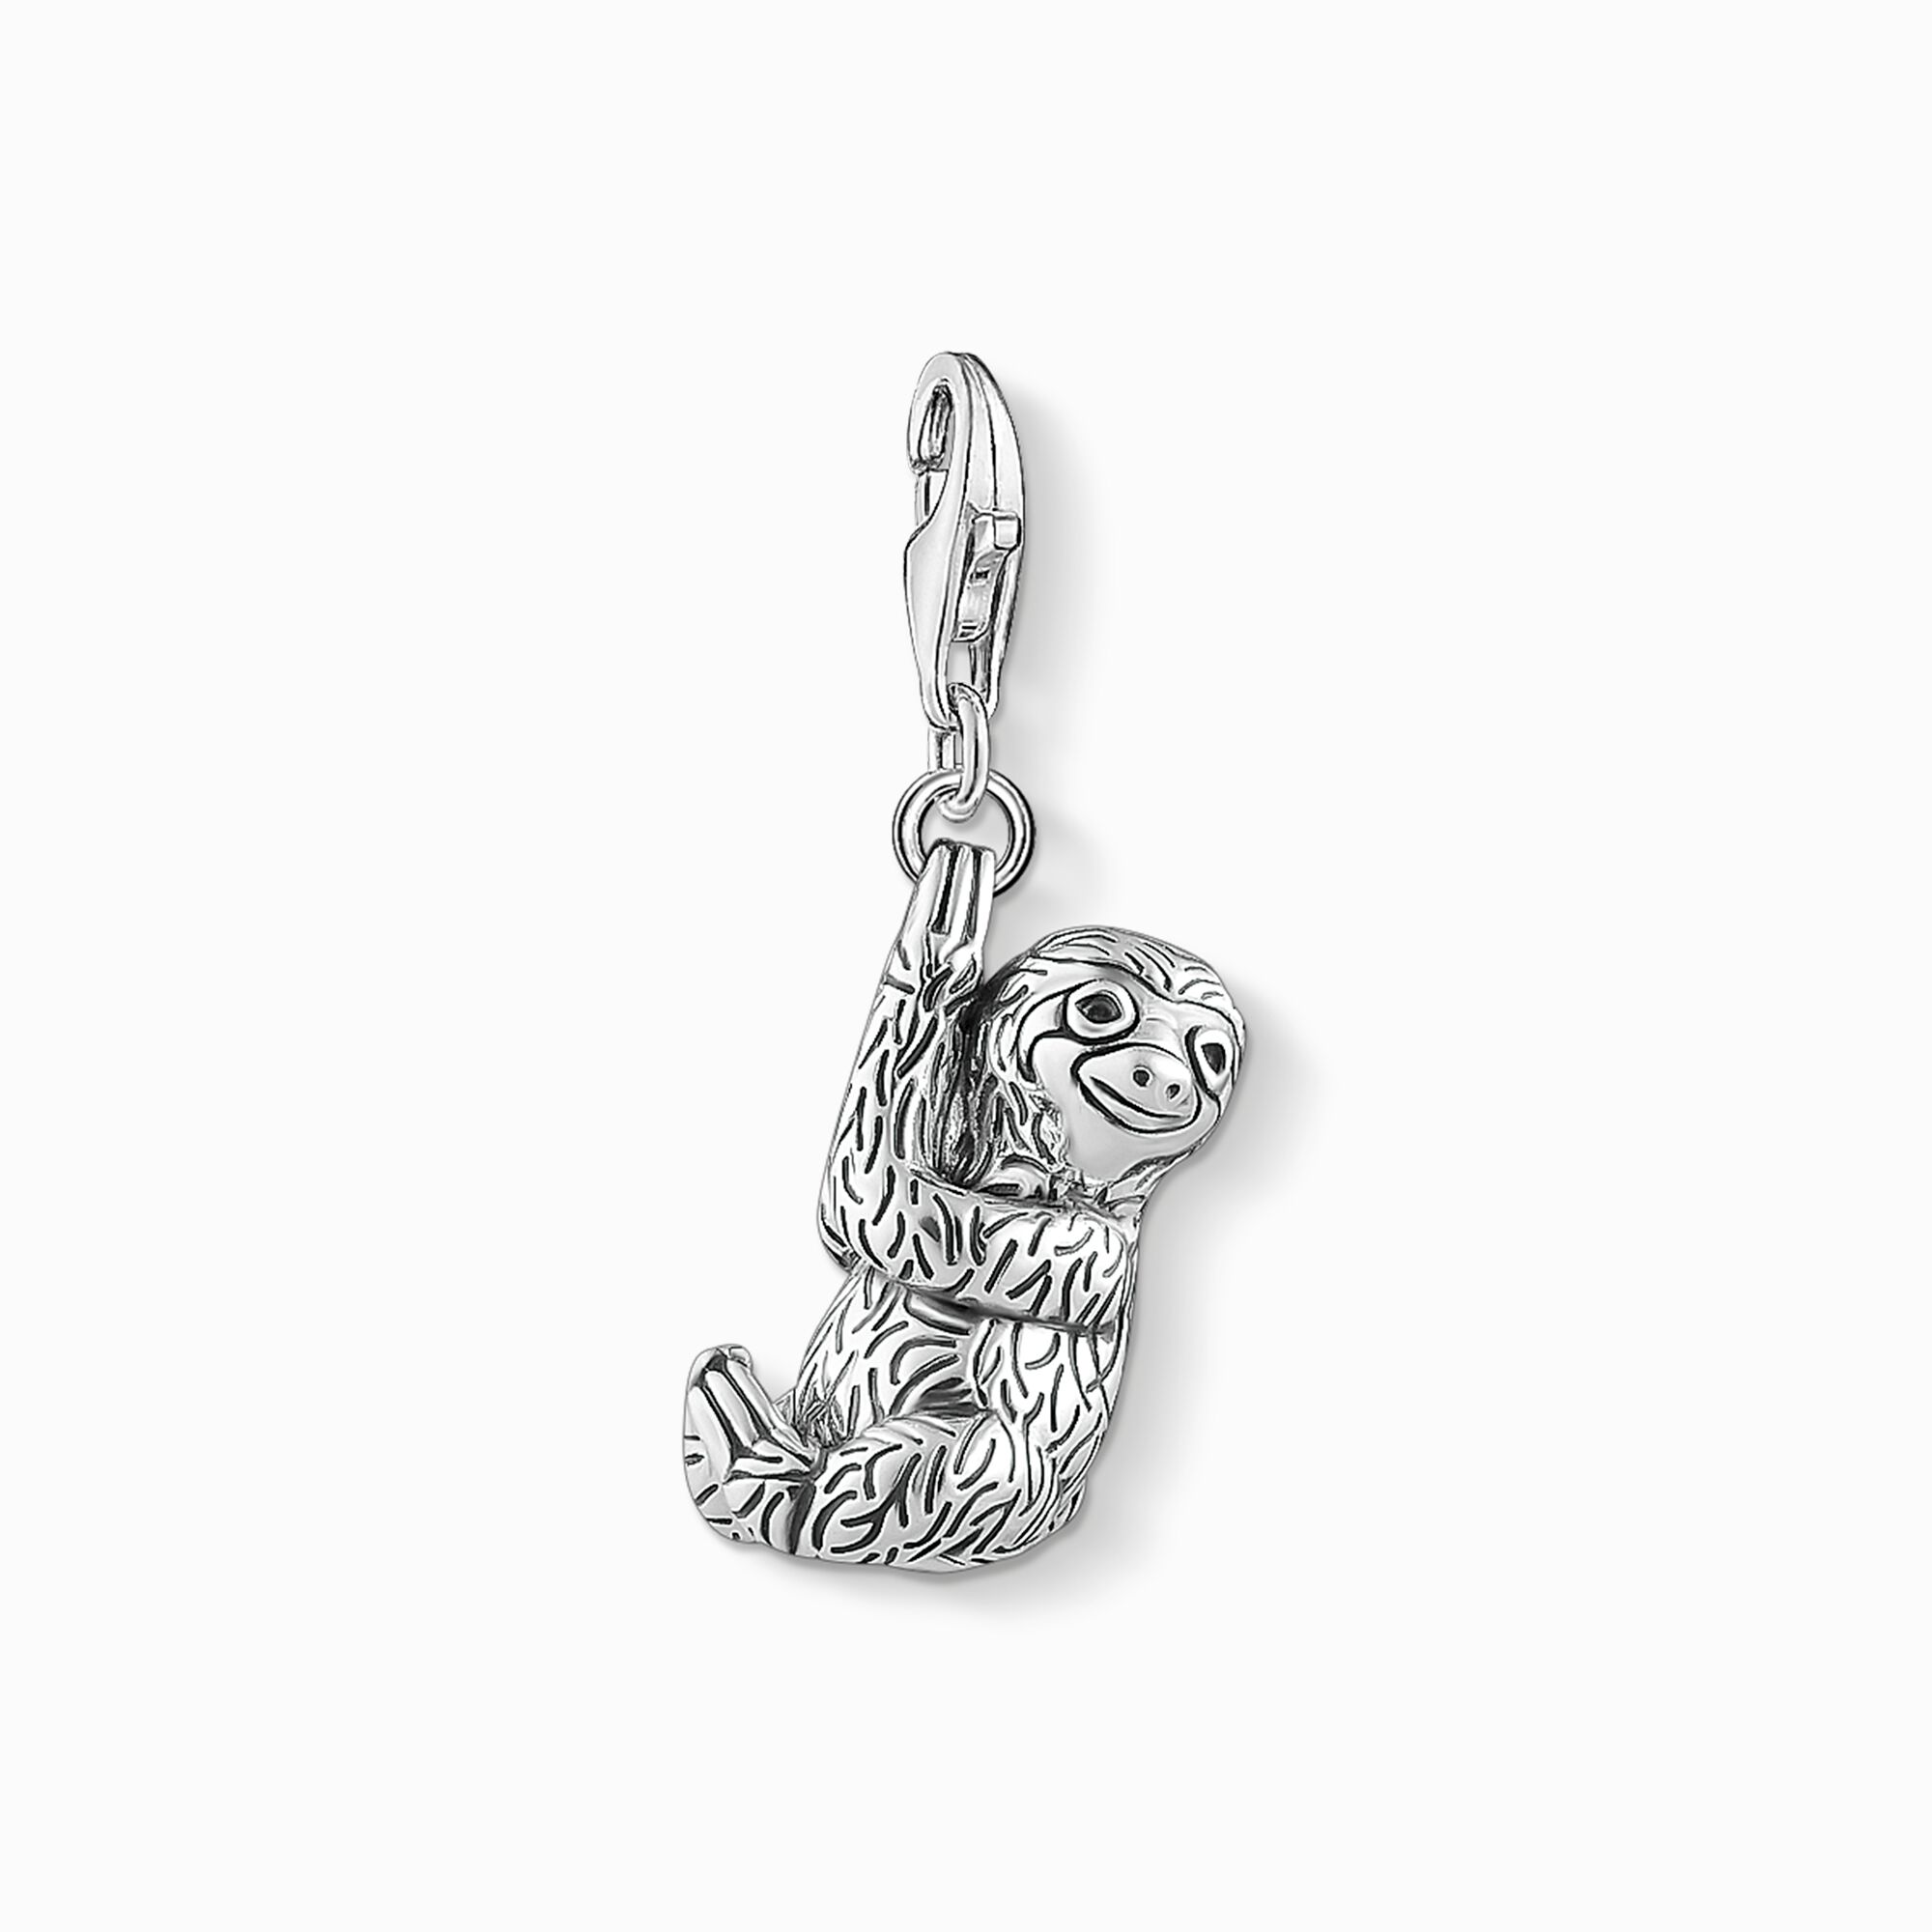 Charm pendant Sloth from the Charm Club collection in the THOMAS SABO online store